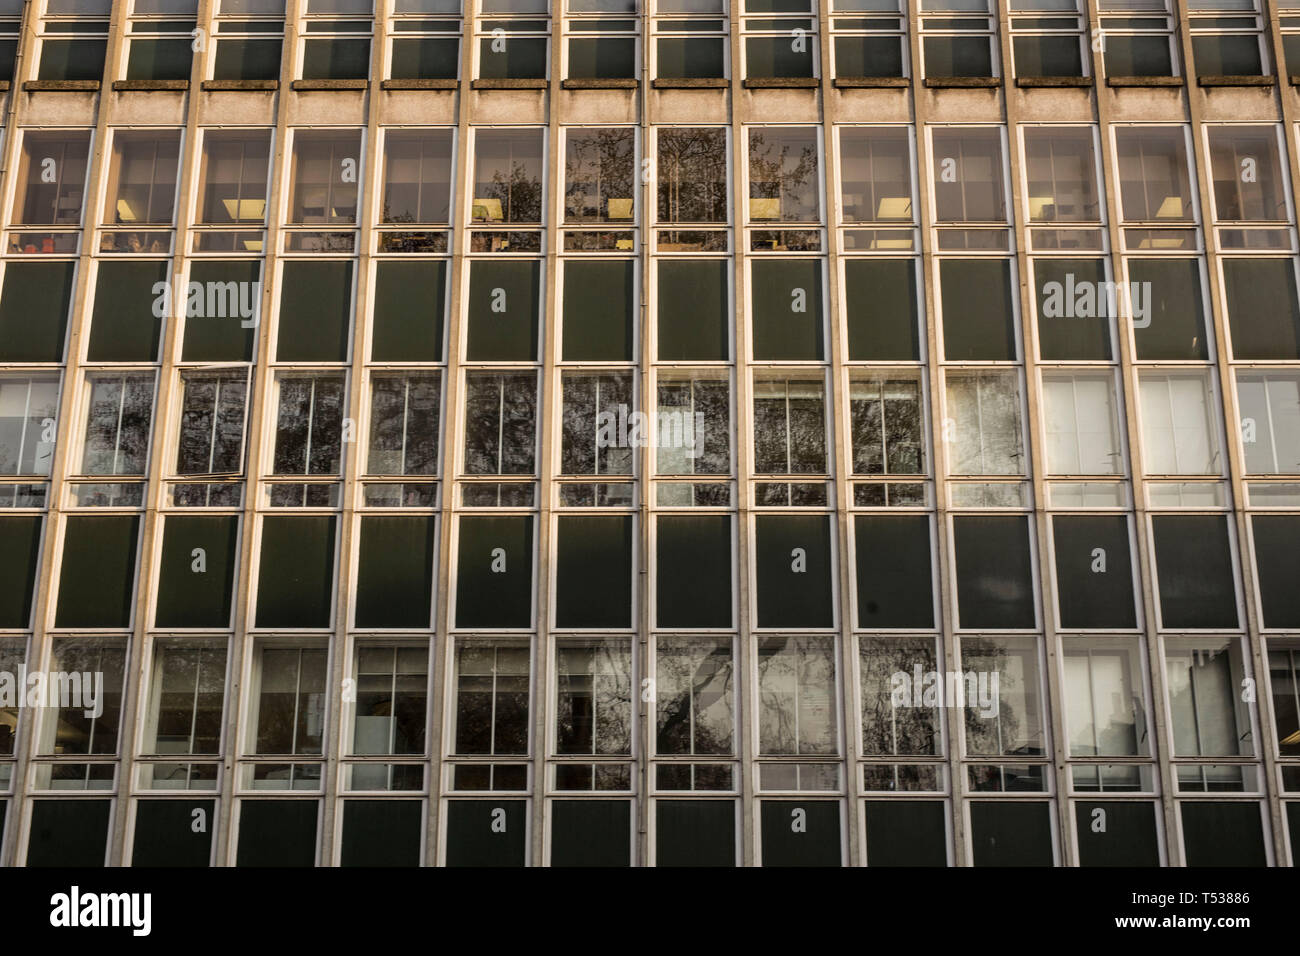 Detail of office block in central London. Stock Photo